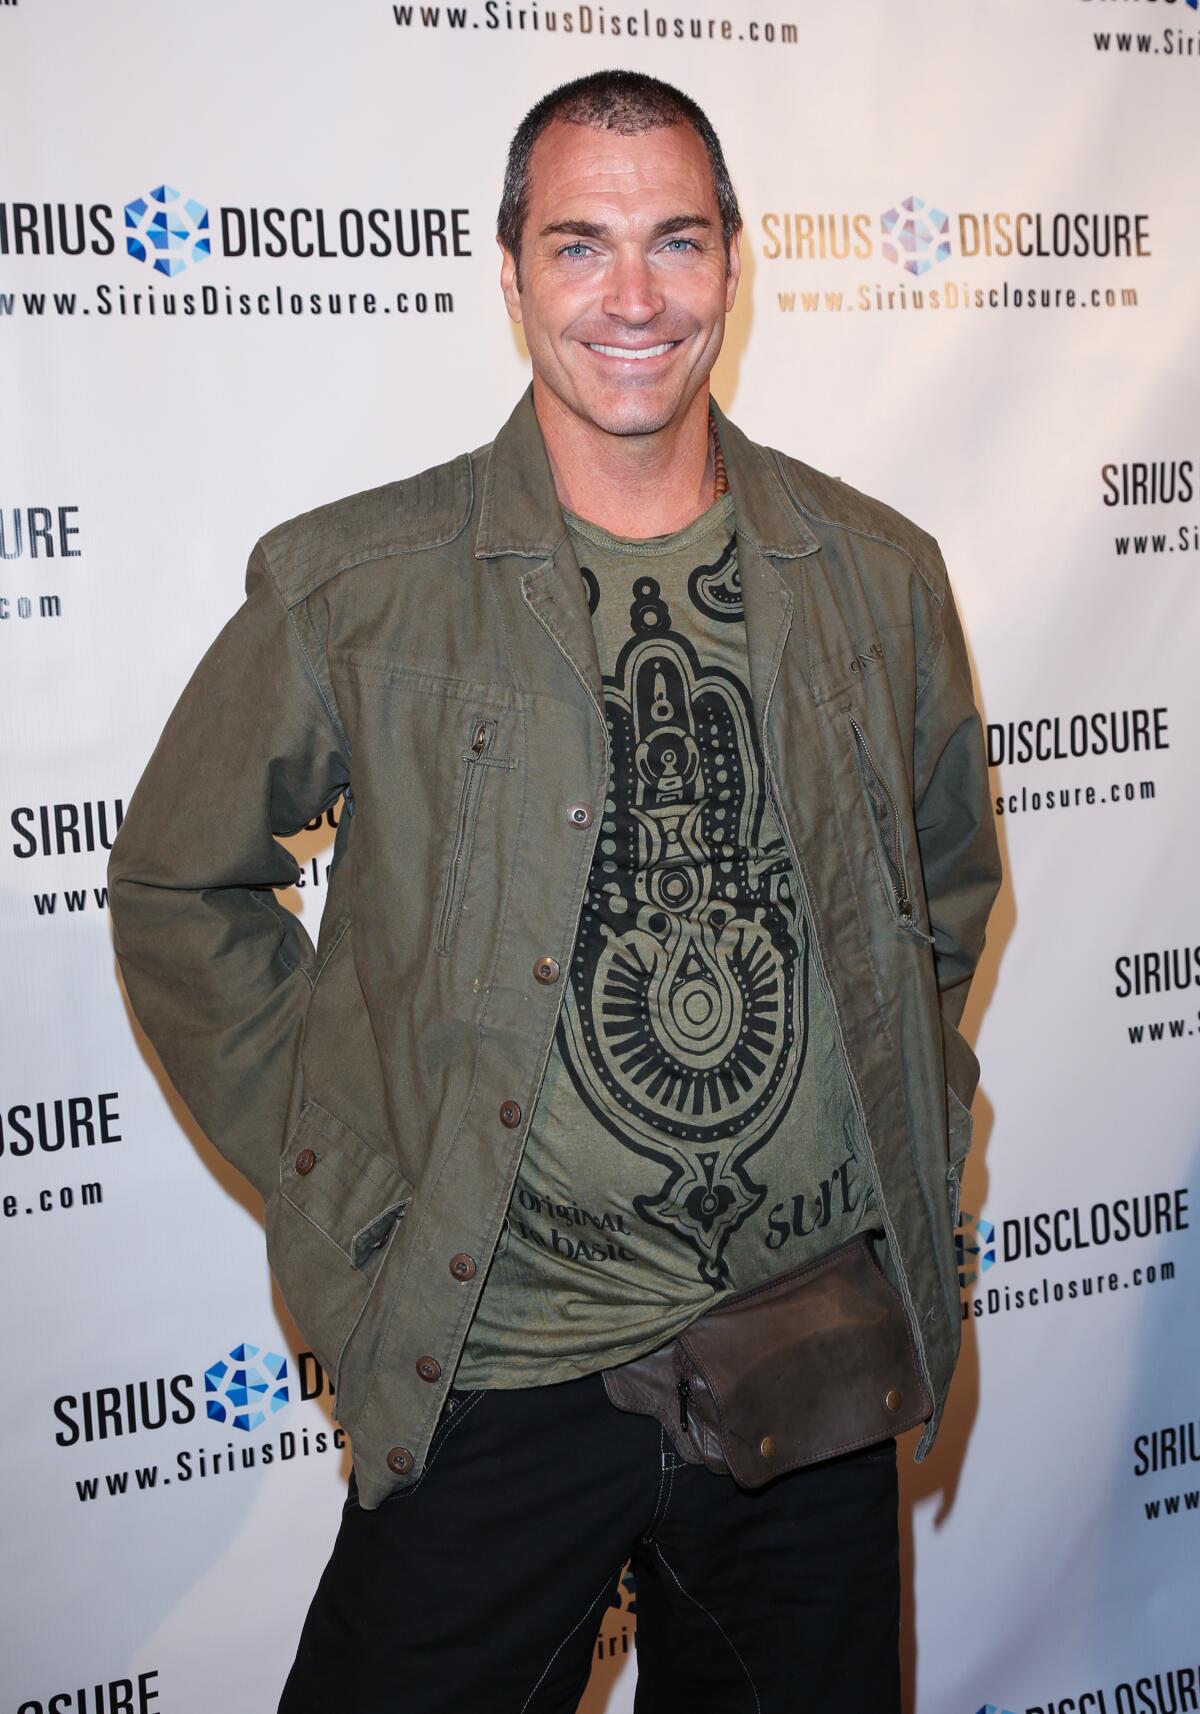 Founder and CEO of Elevate Mikki Willis attends the UFO documentary "Sirius" premiere at the Regal 14 at LA Live Downtown on April 22, 2013 in Los Angeles, California.